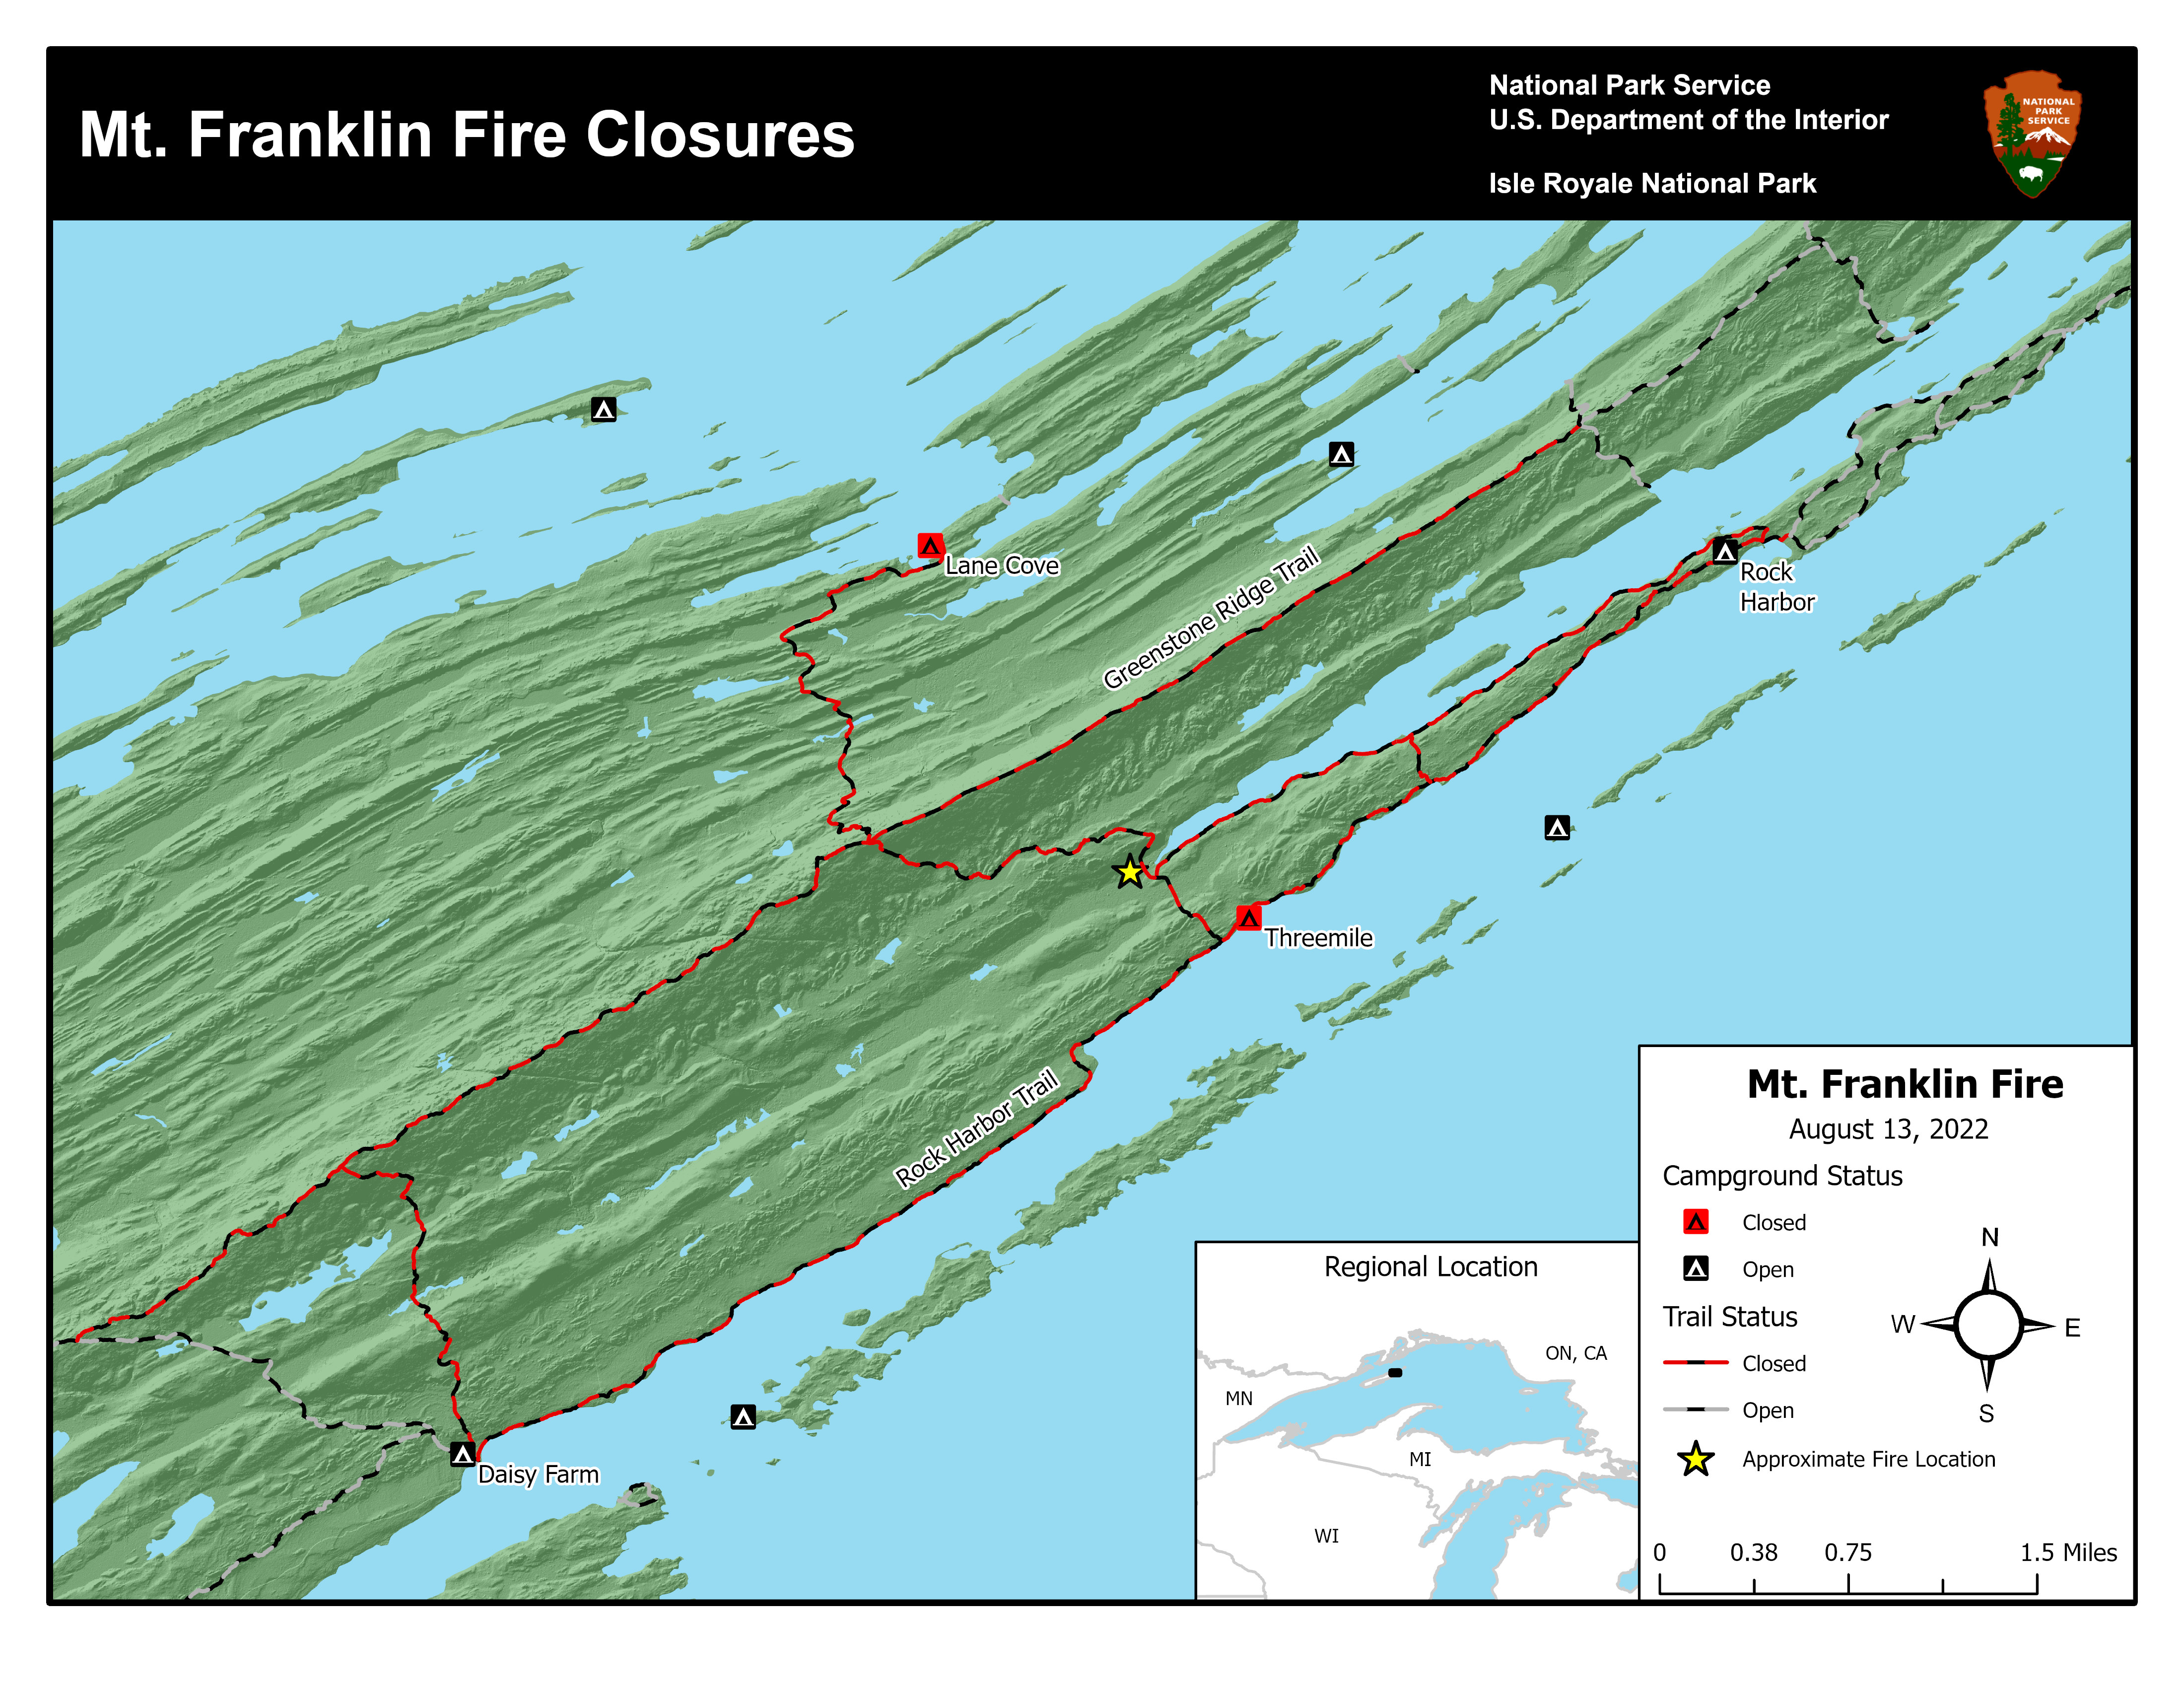 Map of northeastern Isle Royale showing closed trails and campgrounds.